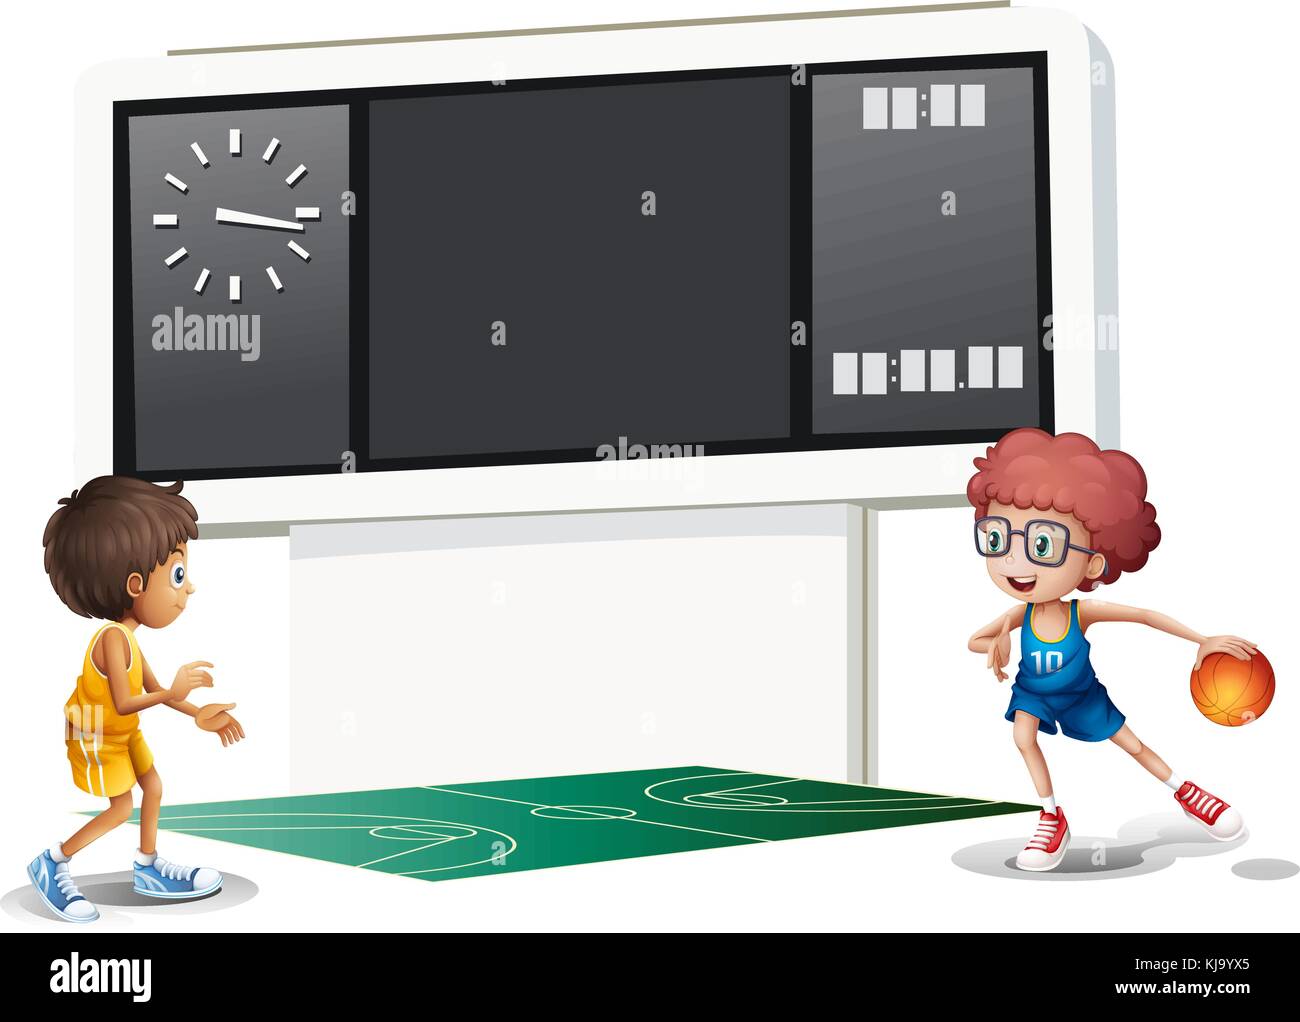 Illustration of the two boys playing basketball in a court with a scoreboard on a white background Stock Vector